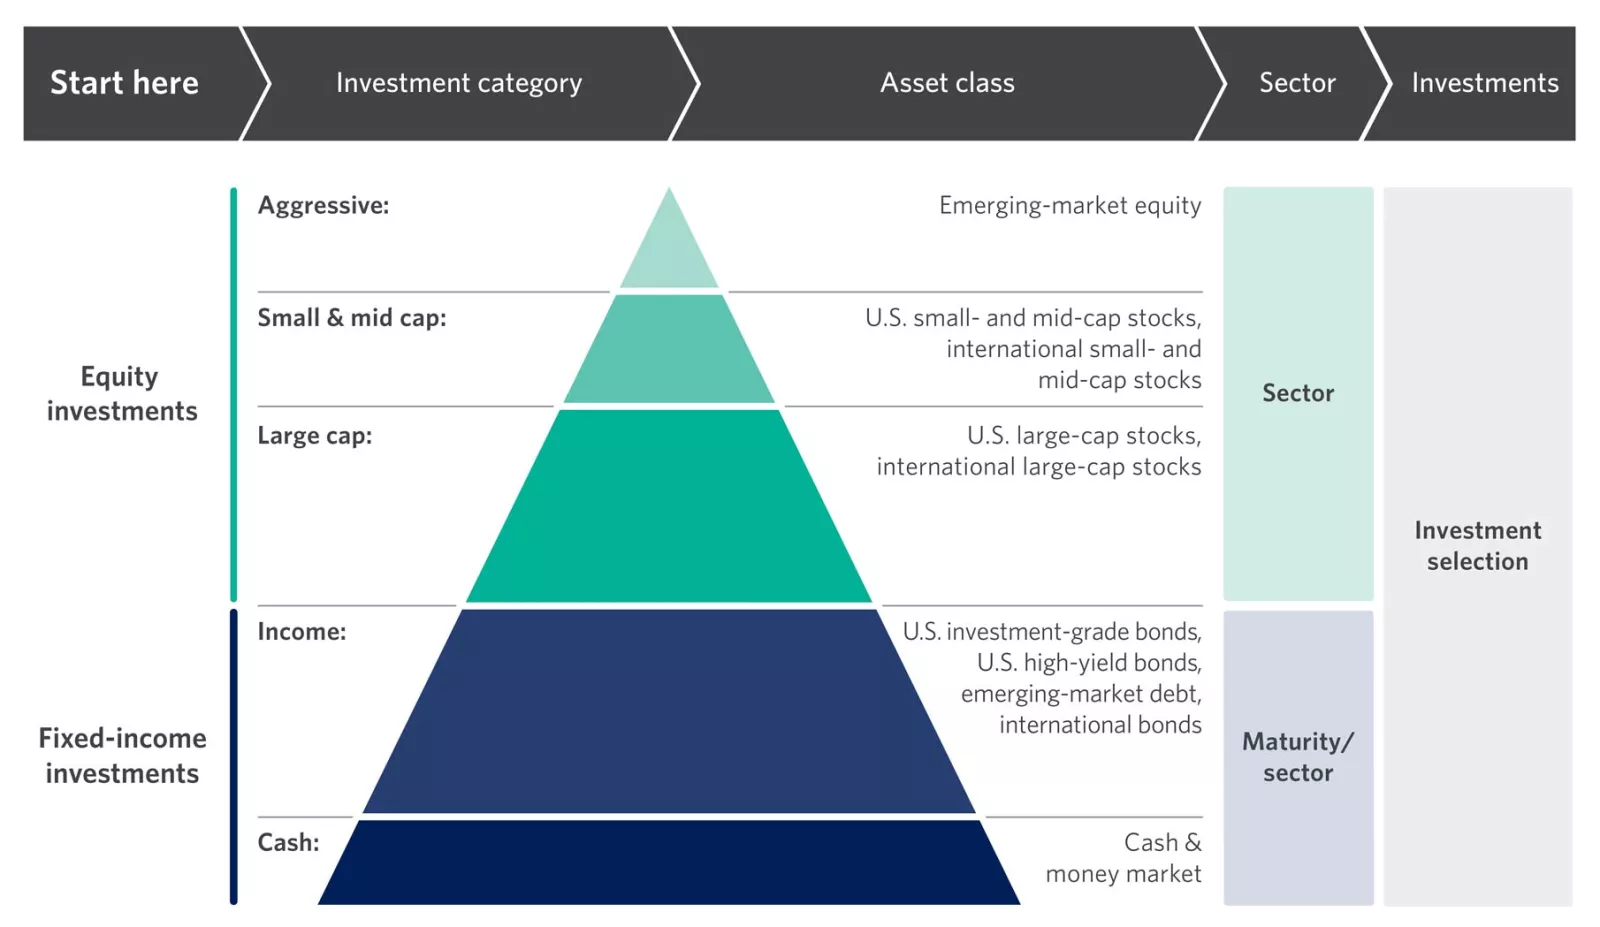 This chart describes Edwards Jones' overall investment steps to creating a portfolio and asset class guidance.